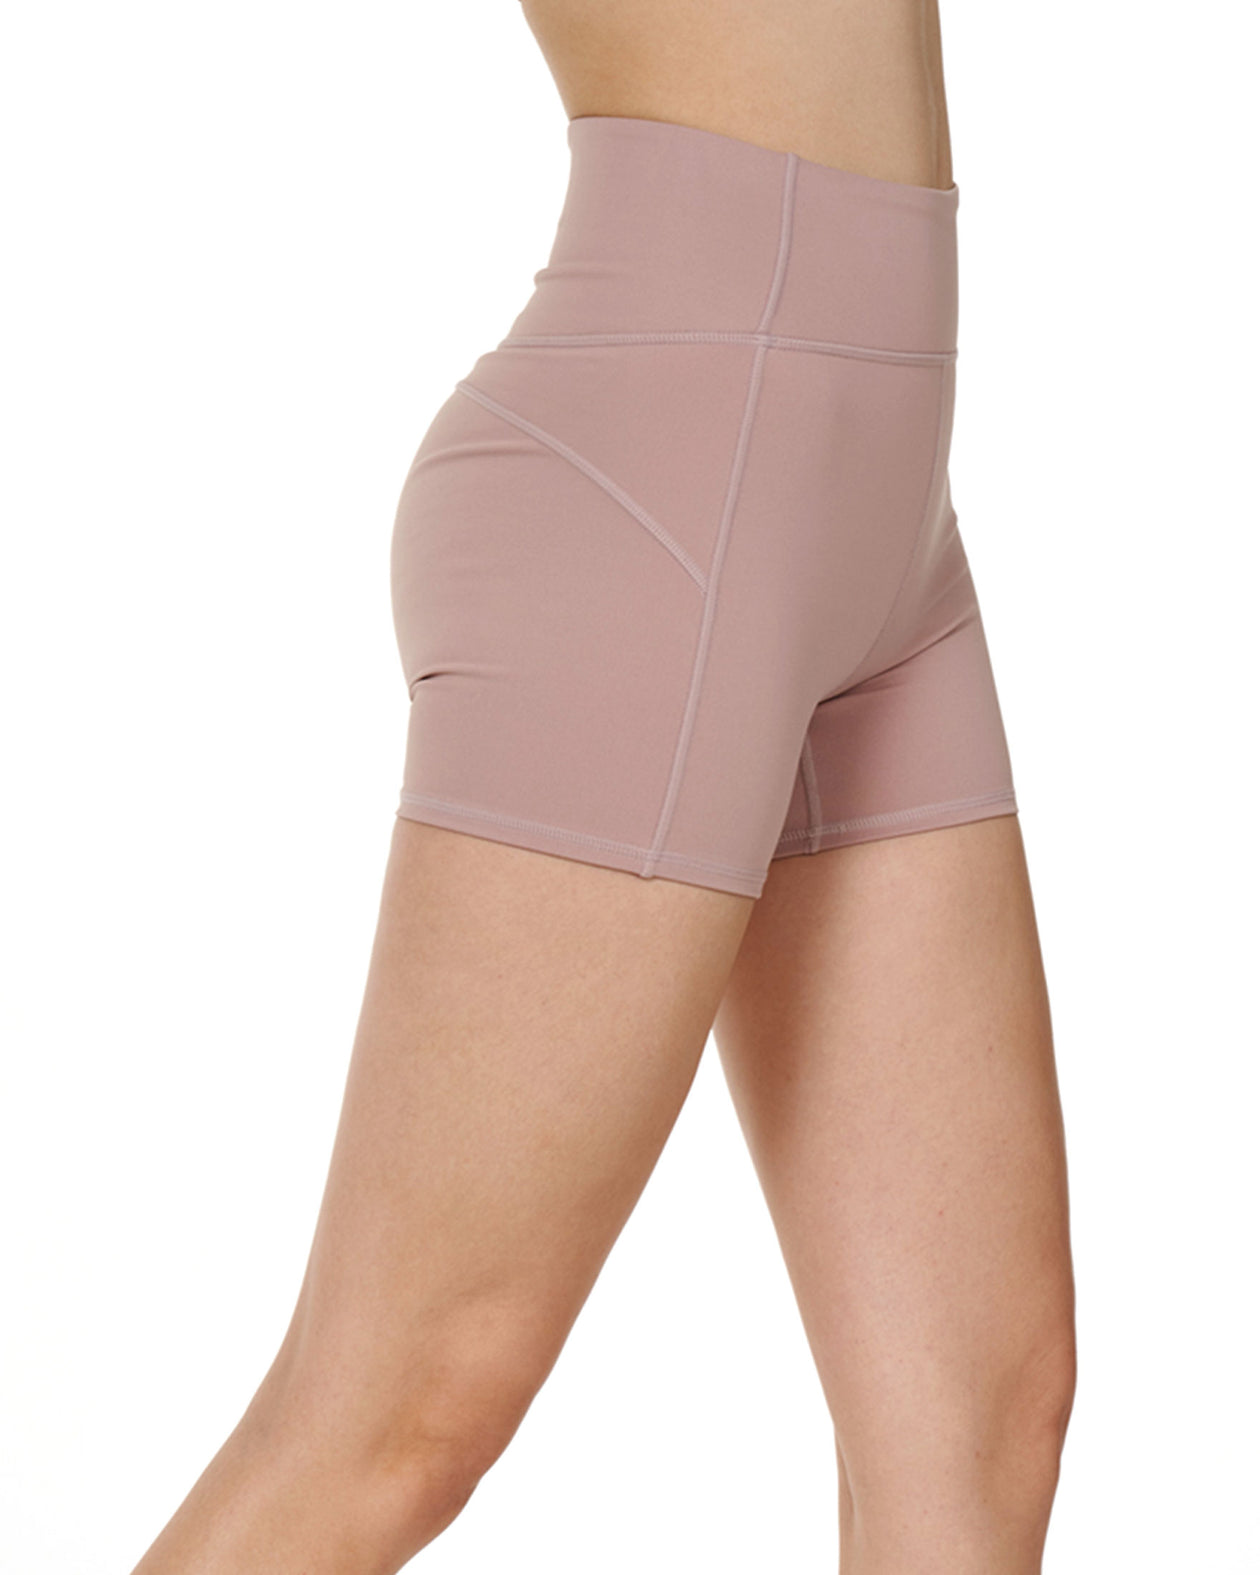 yoga shorts camel toe_7, yoga shorts camel toe_7 Suppliers and  Manufacturers at